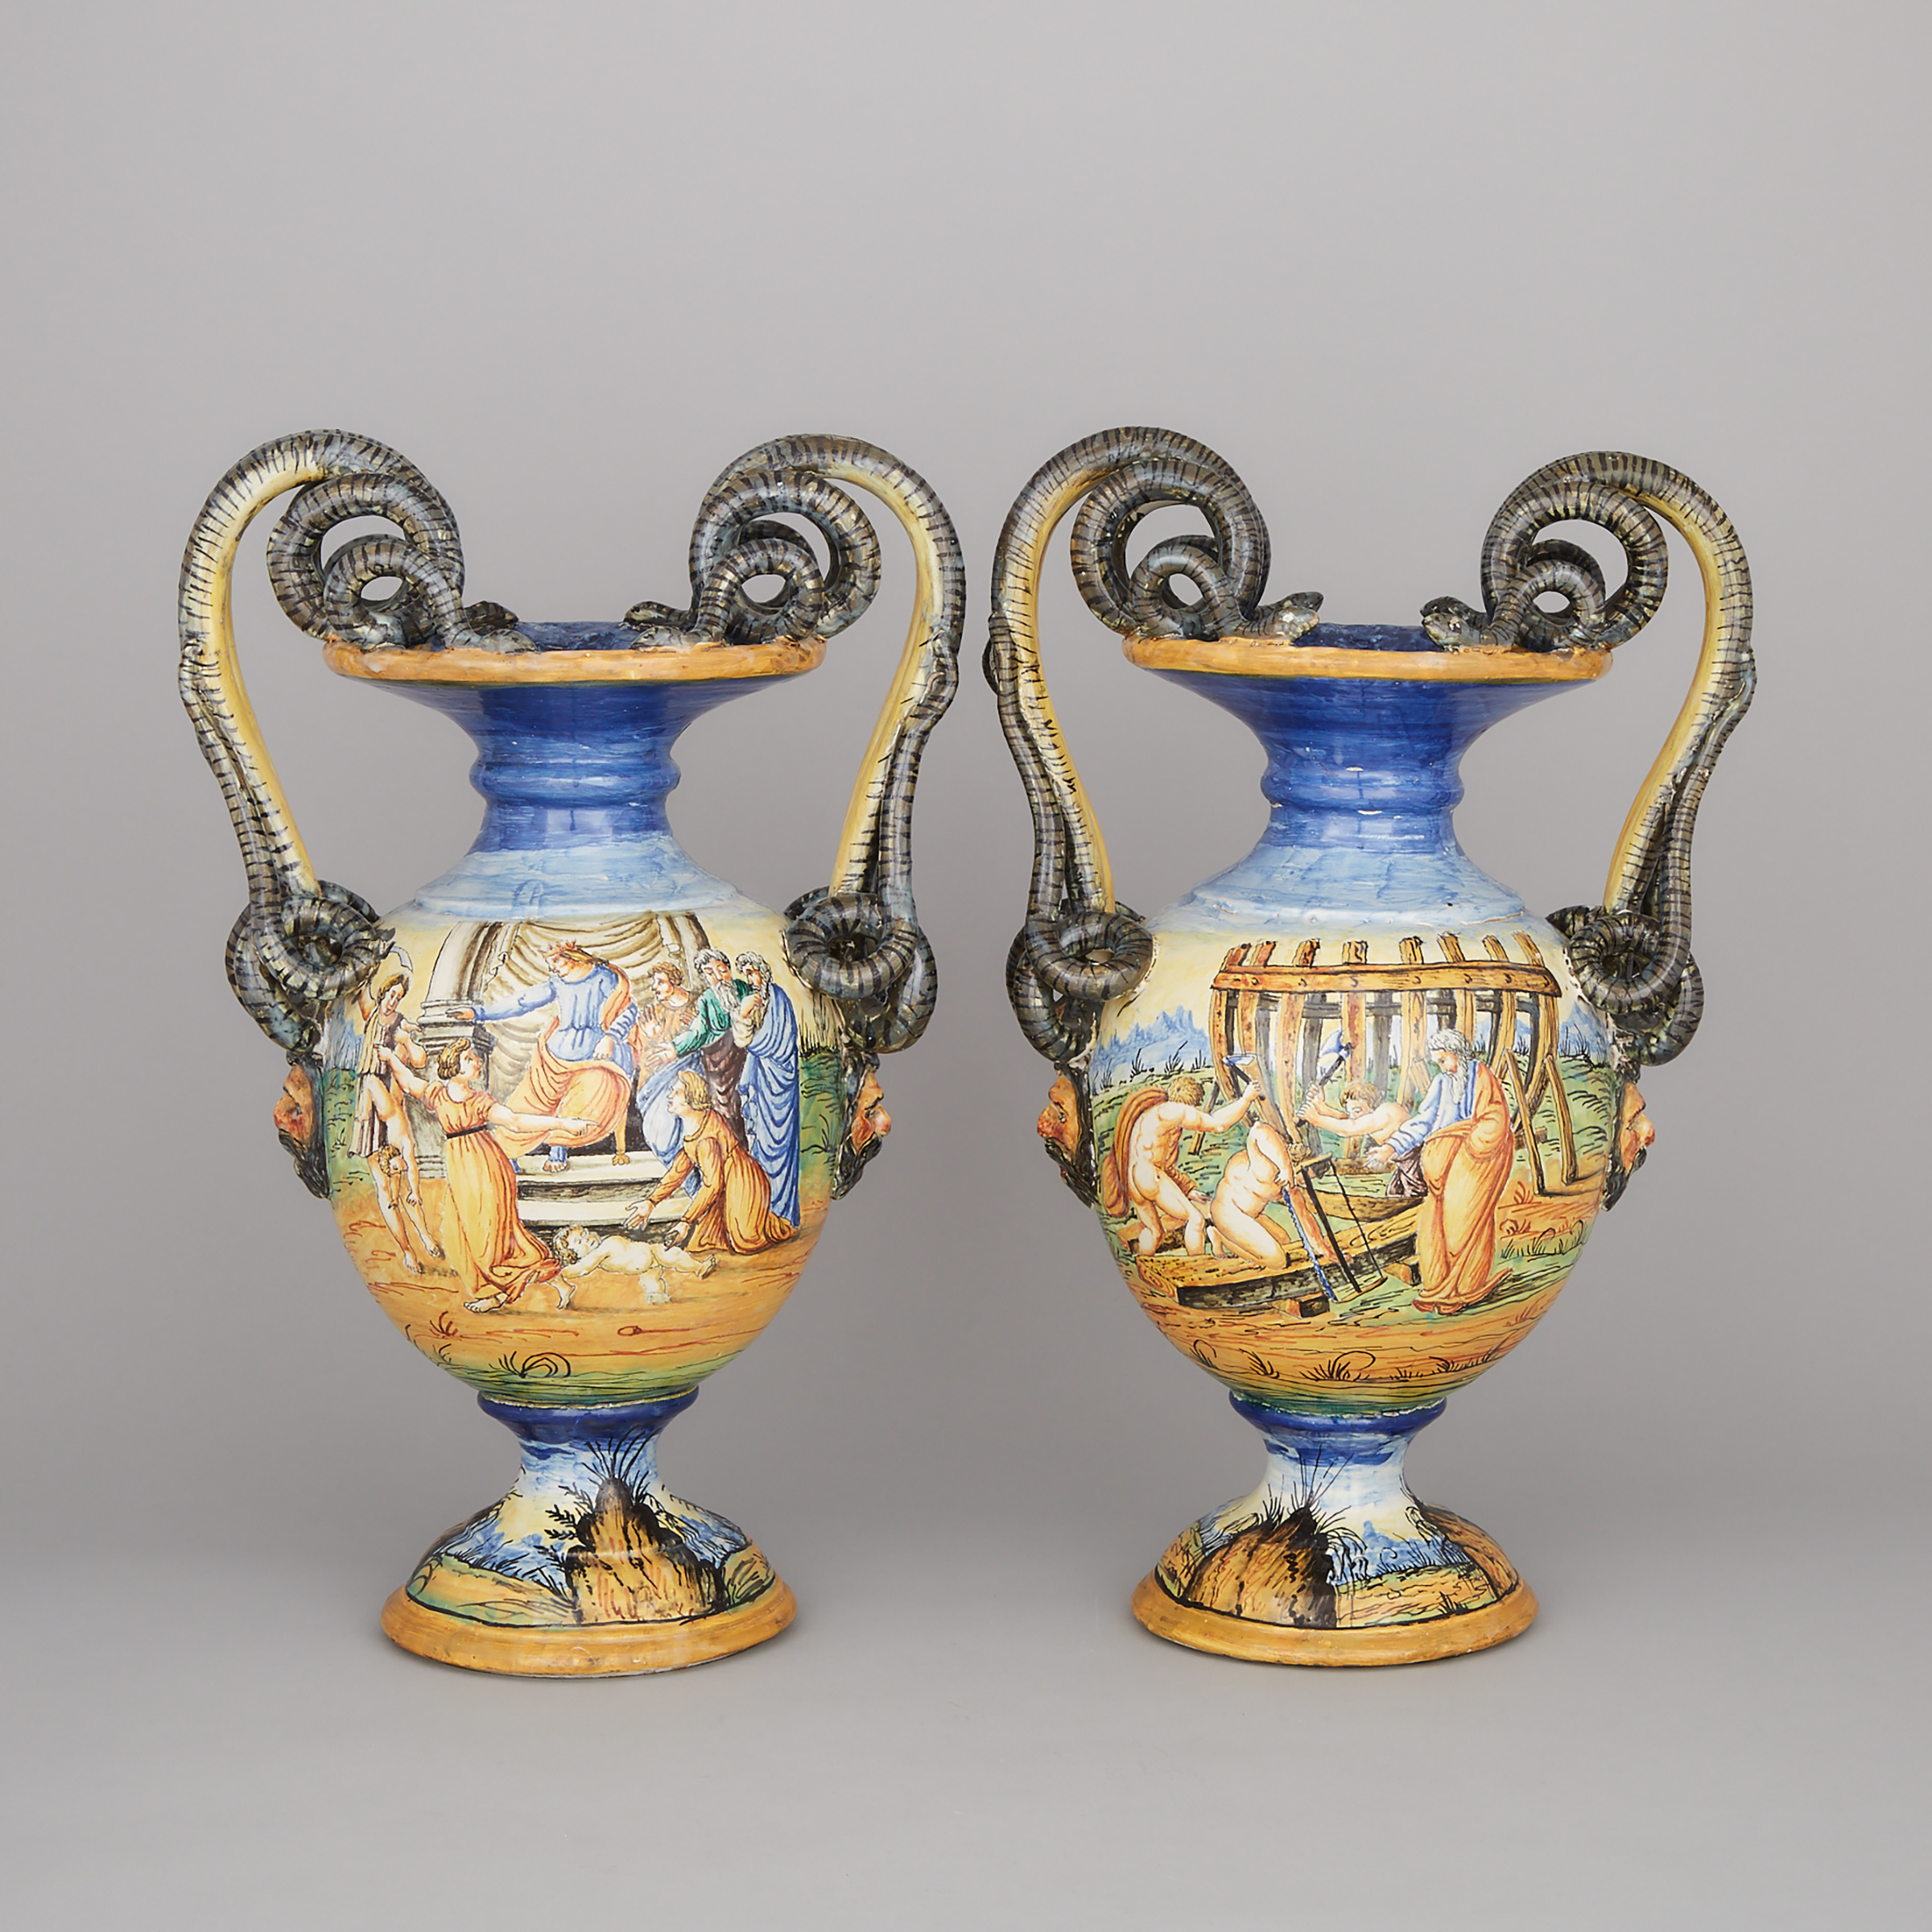 Pair of Urbino Style Maiolica Vases, late 19th/early 20th century